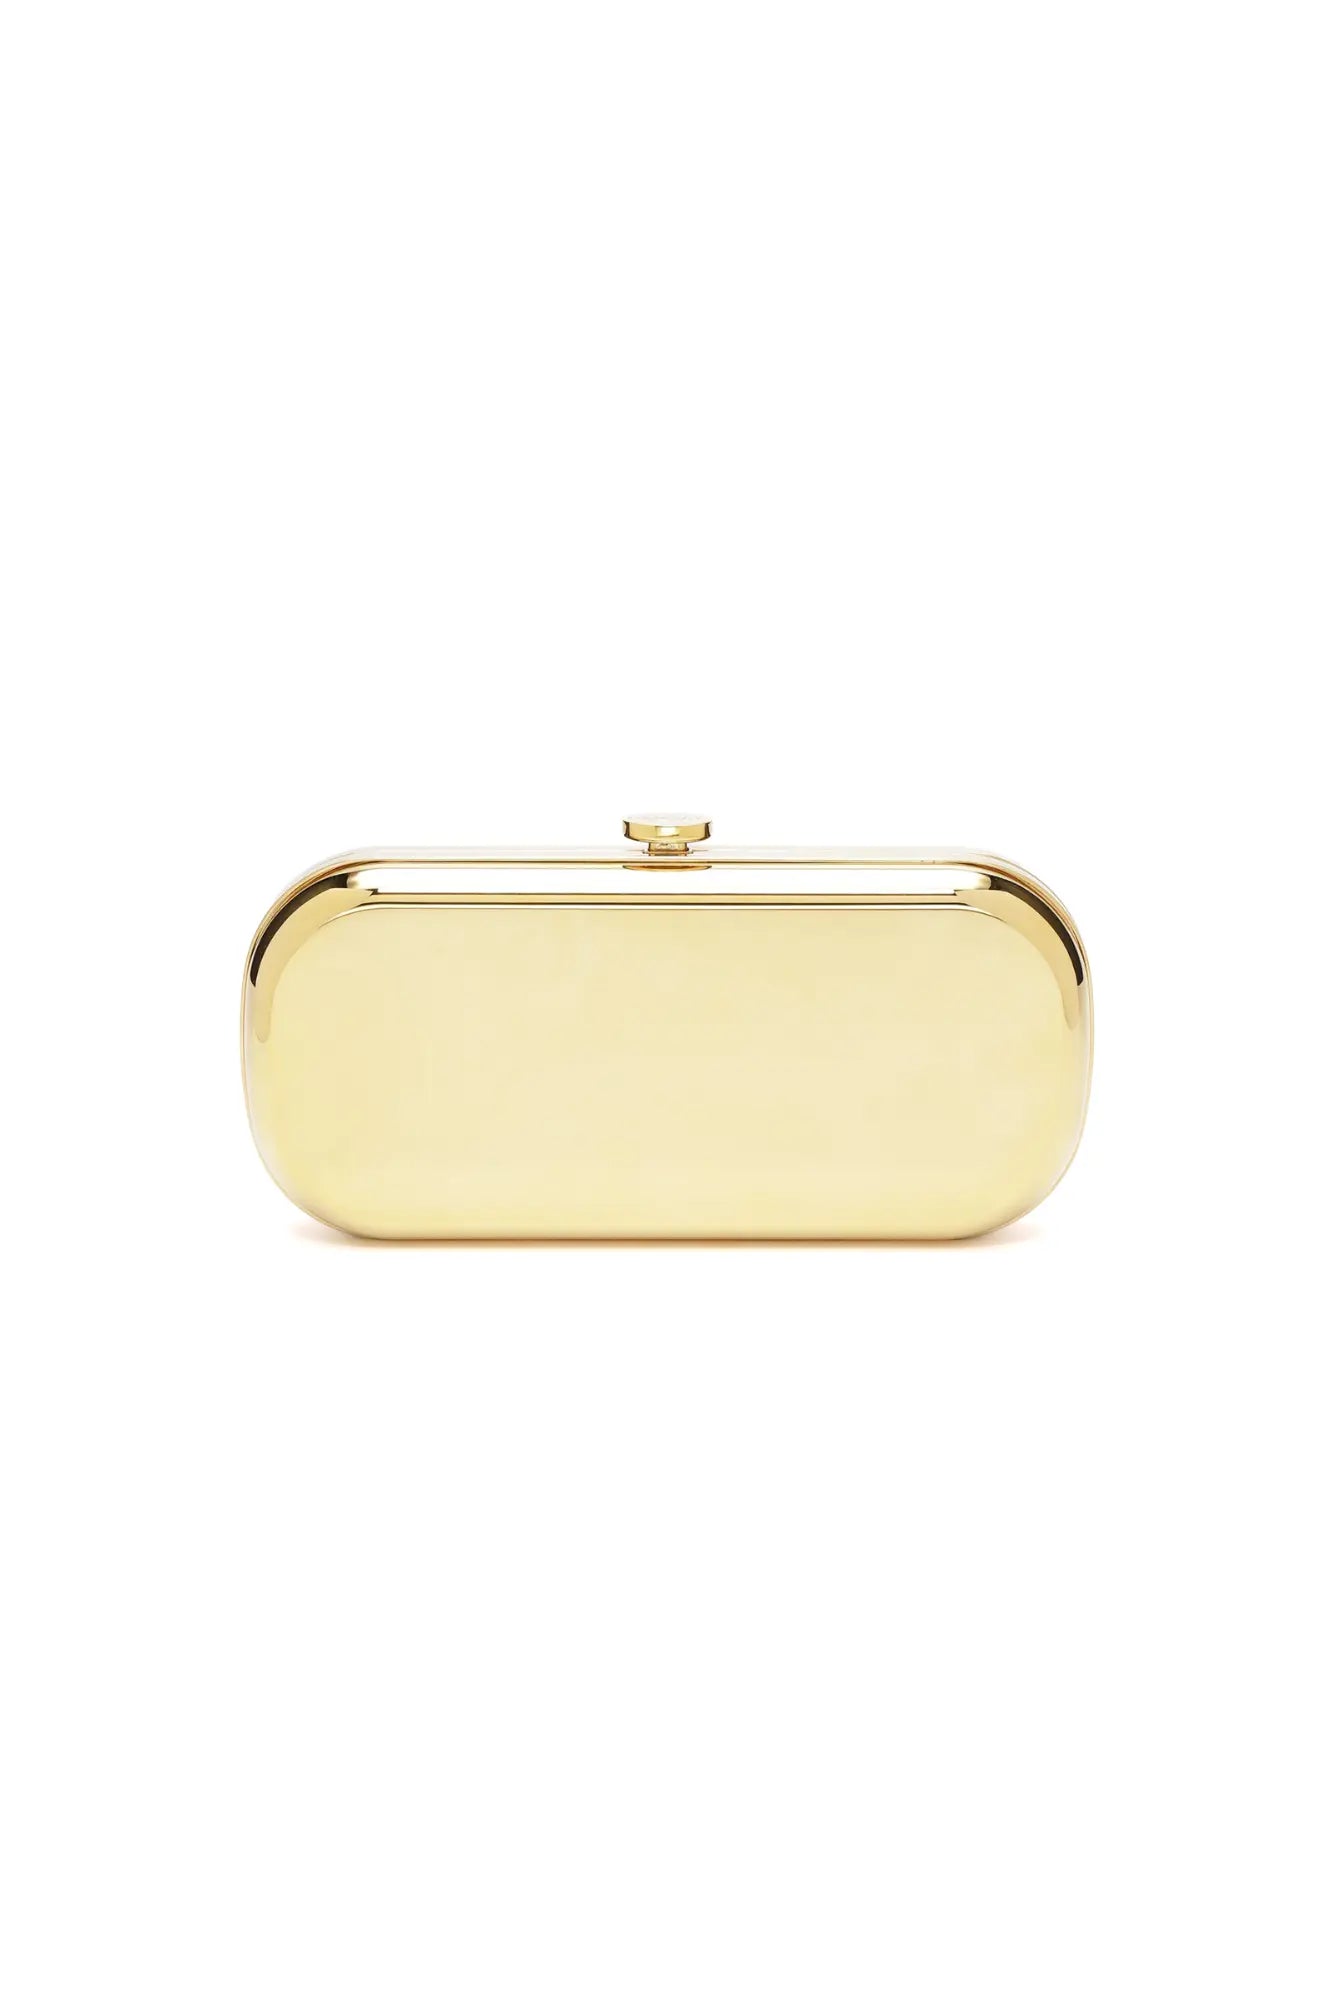 Bella Clutch Golden Petite by The Bella Rosa Collection with an engraved sentiment plaque on a white background.